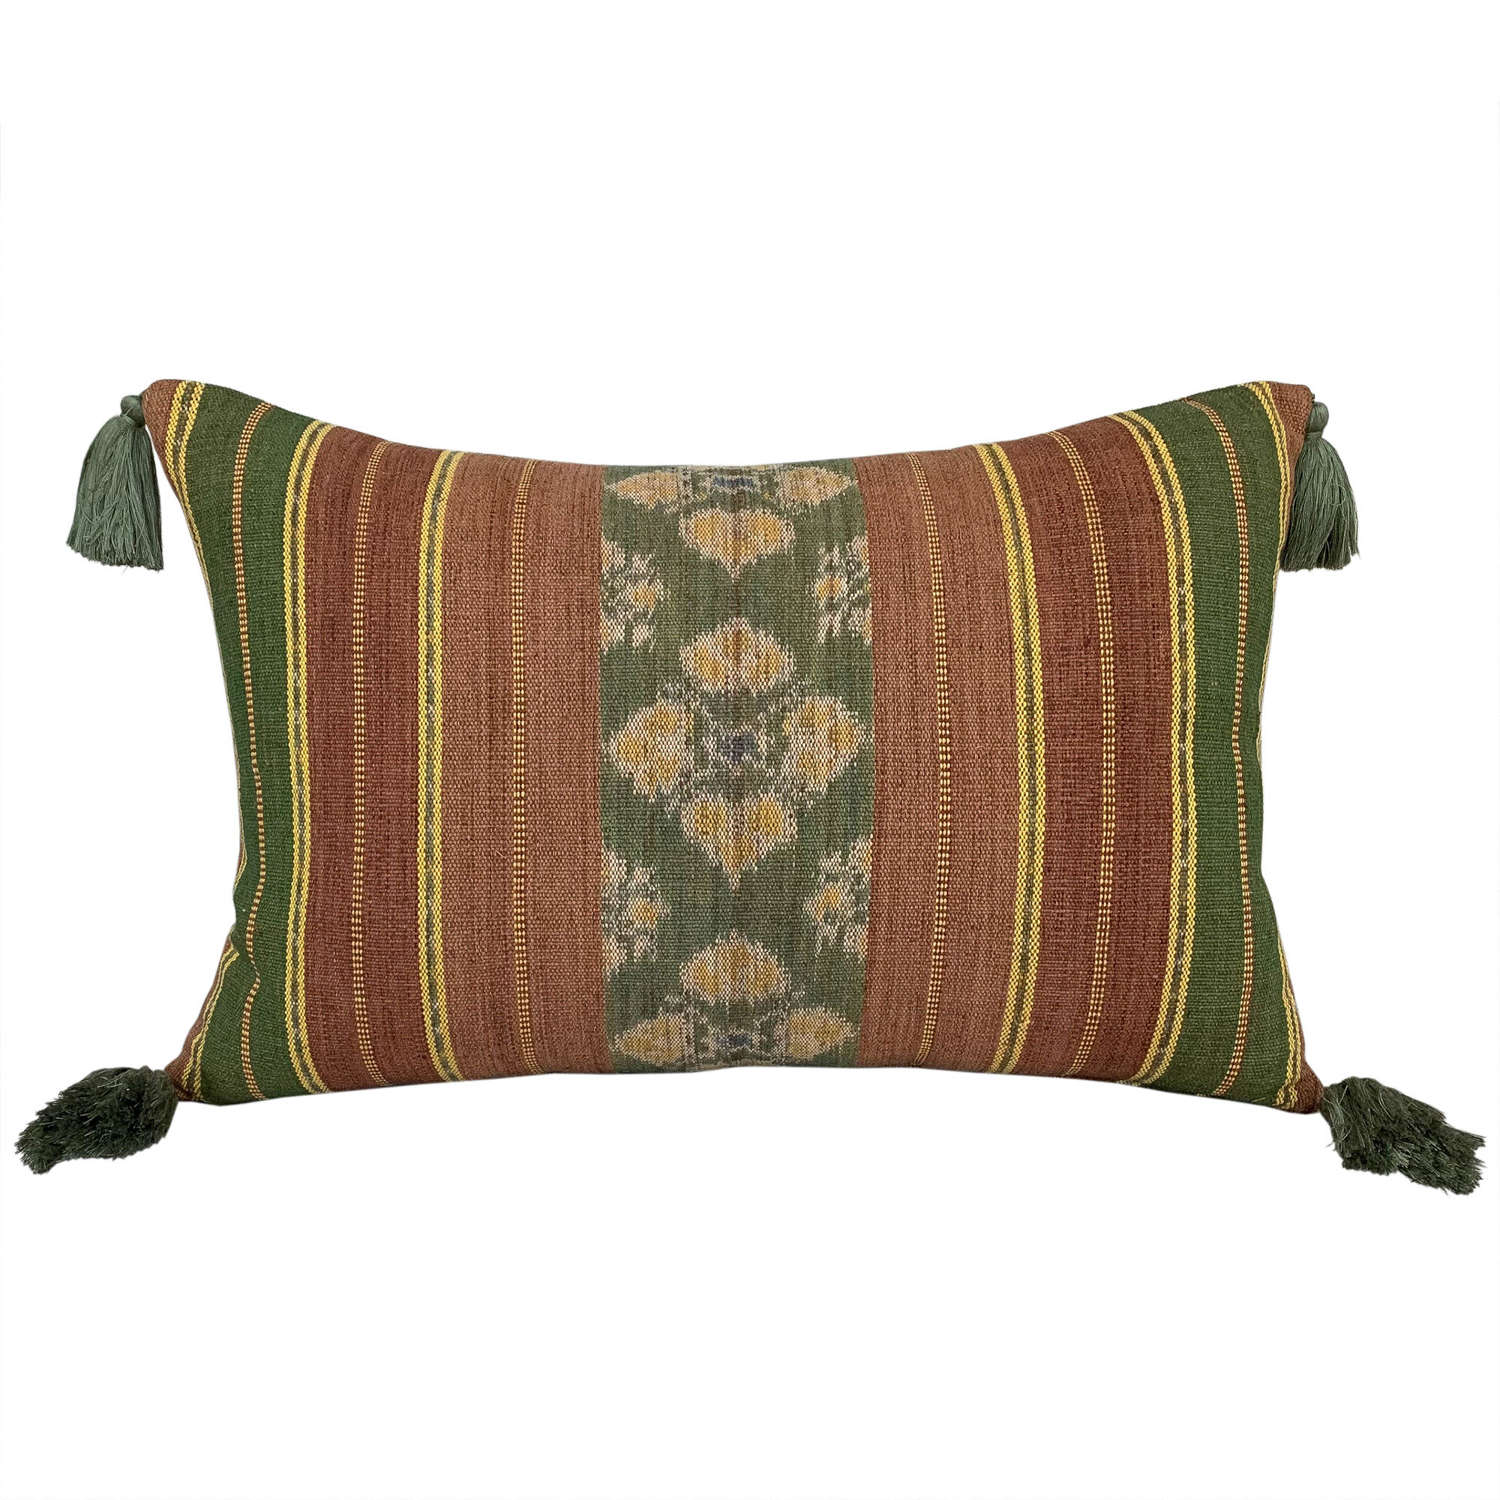 Flores cushion with green tassels